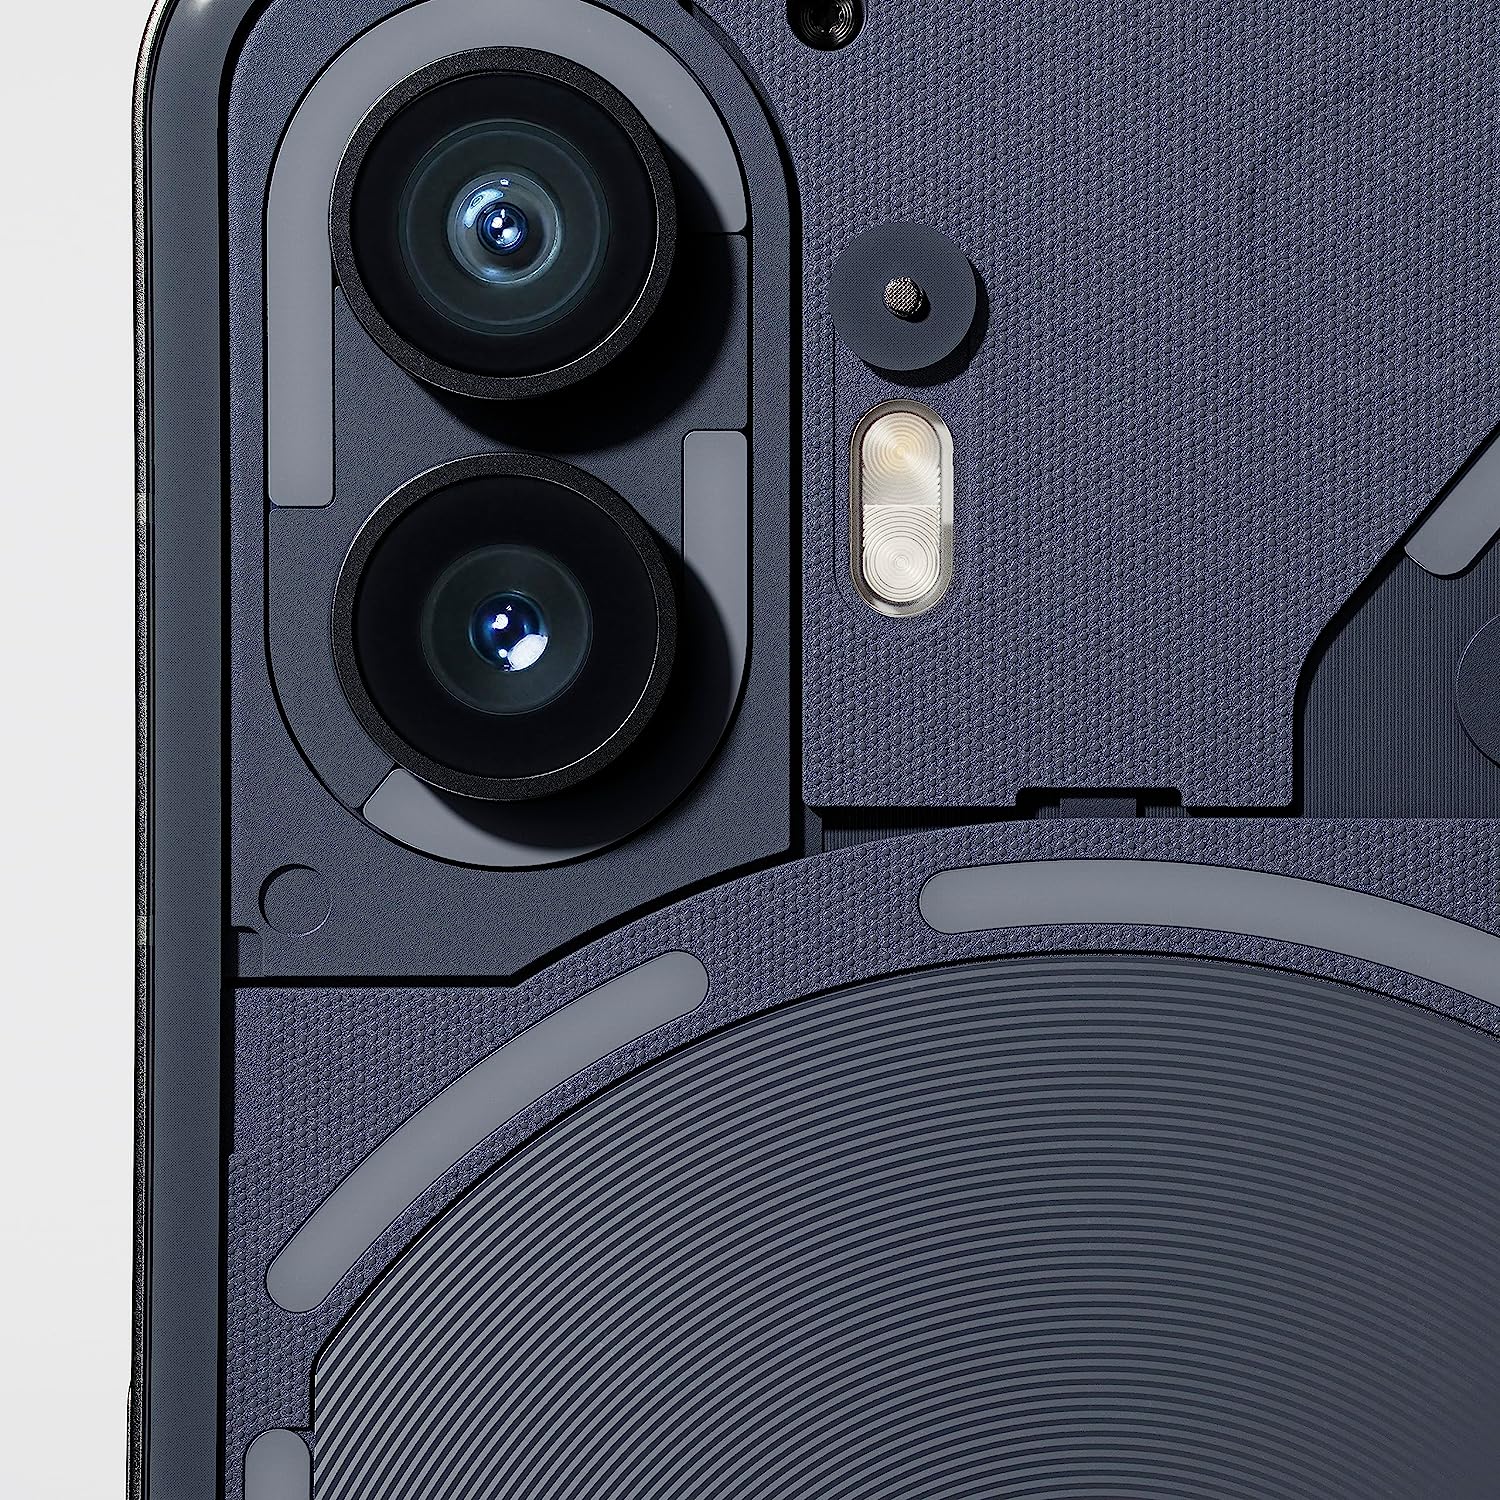 This image appears to be a close-up view of the camera system of the nothing phone 2. The visible features include two camera lenses, which could indicate a dual-camera setup often used for improving photo capabilities such as zoom and depth perception. There's also a flash module next to the camera lenses, and what seems to be a microphone hole for noise cancellation or audio recording. The textured material around the camera module could be part of the phone's back cover design, which is often crafted for aesthetic appeal as well as grip enhancement. The design and complexity of the camera system indicate it is likely a high-end or flagship model of a smartphone.